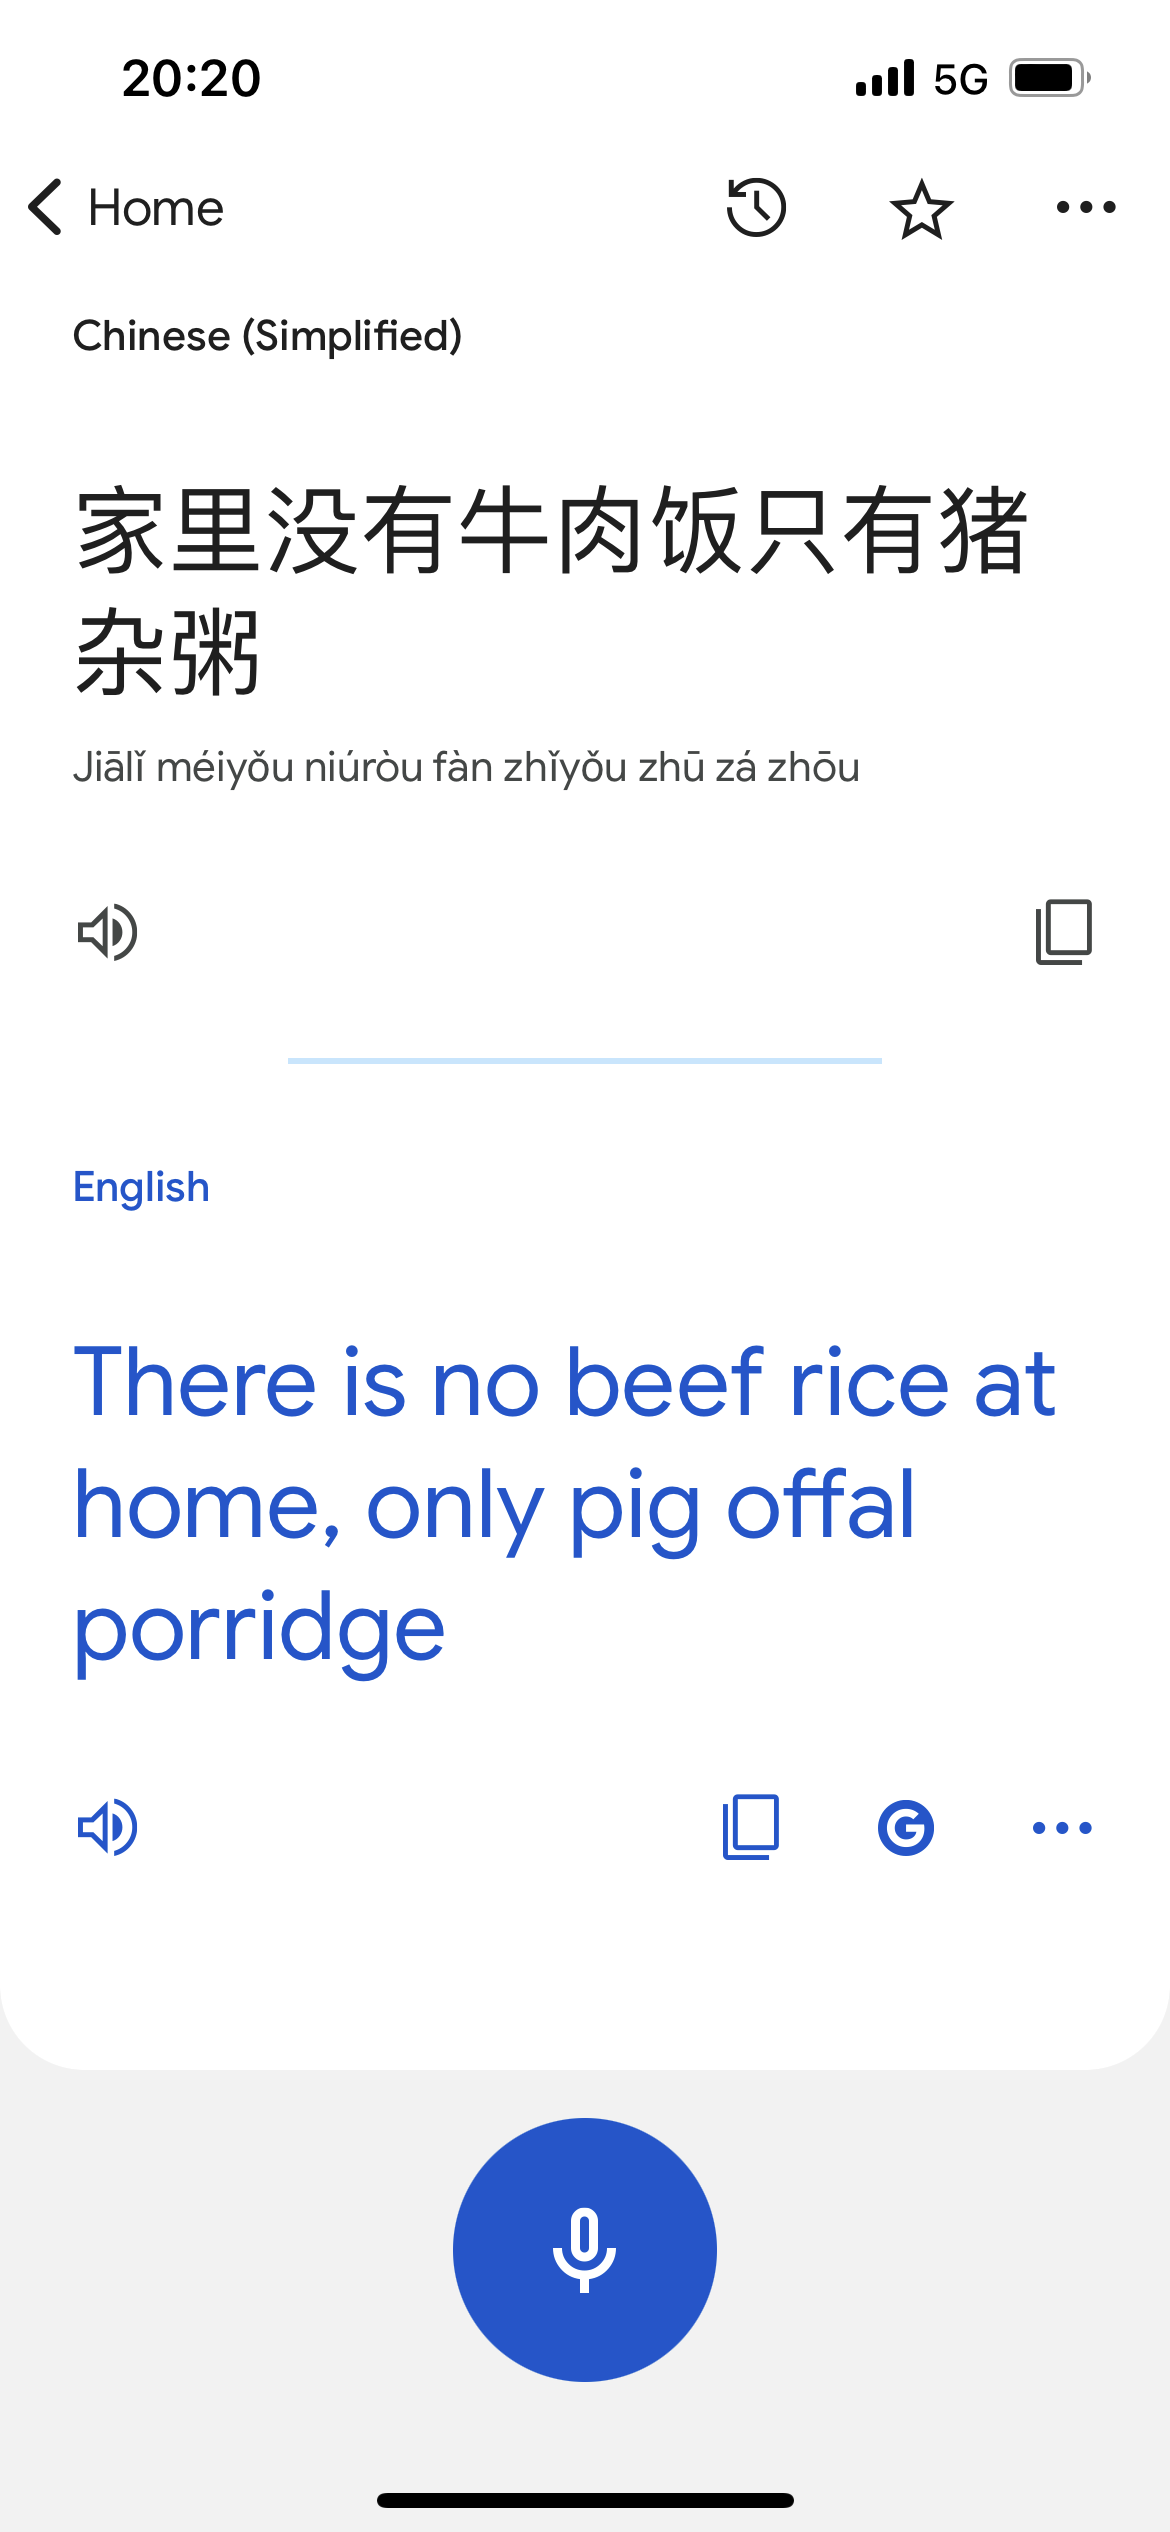 A Google Translate screen telling us that 'there is no beef rice at home, only pig offal porridge'.